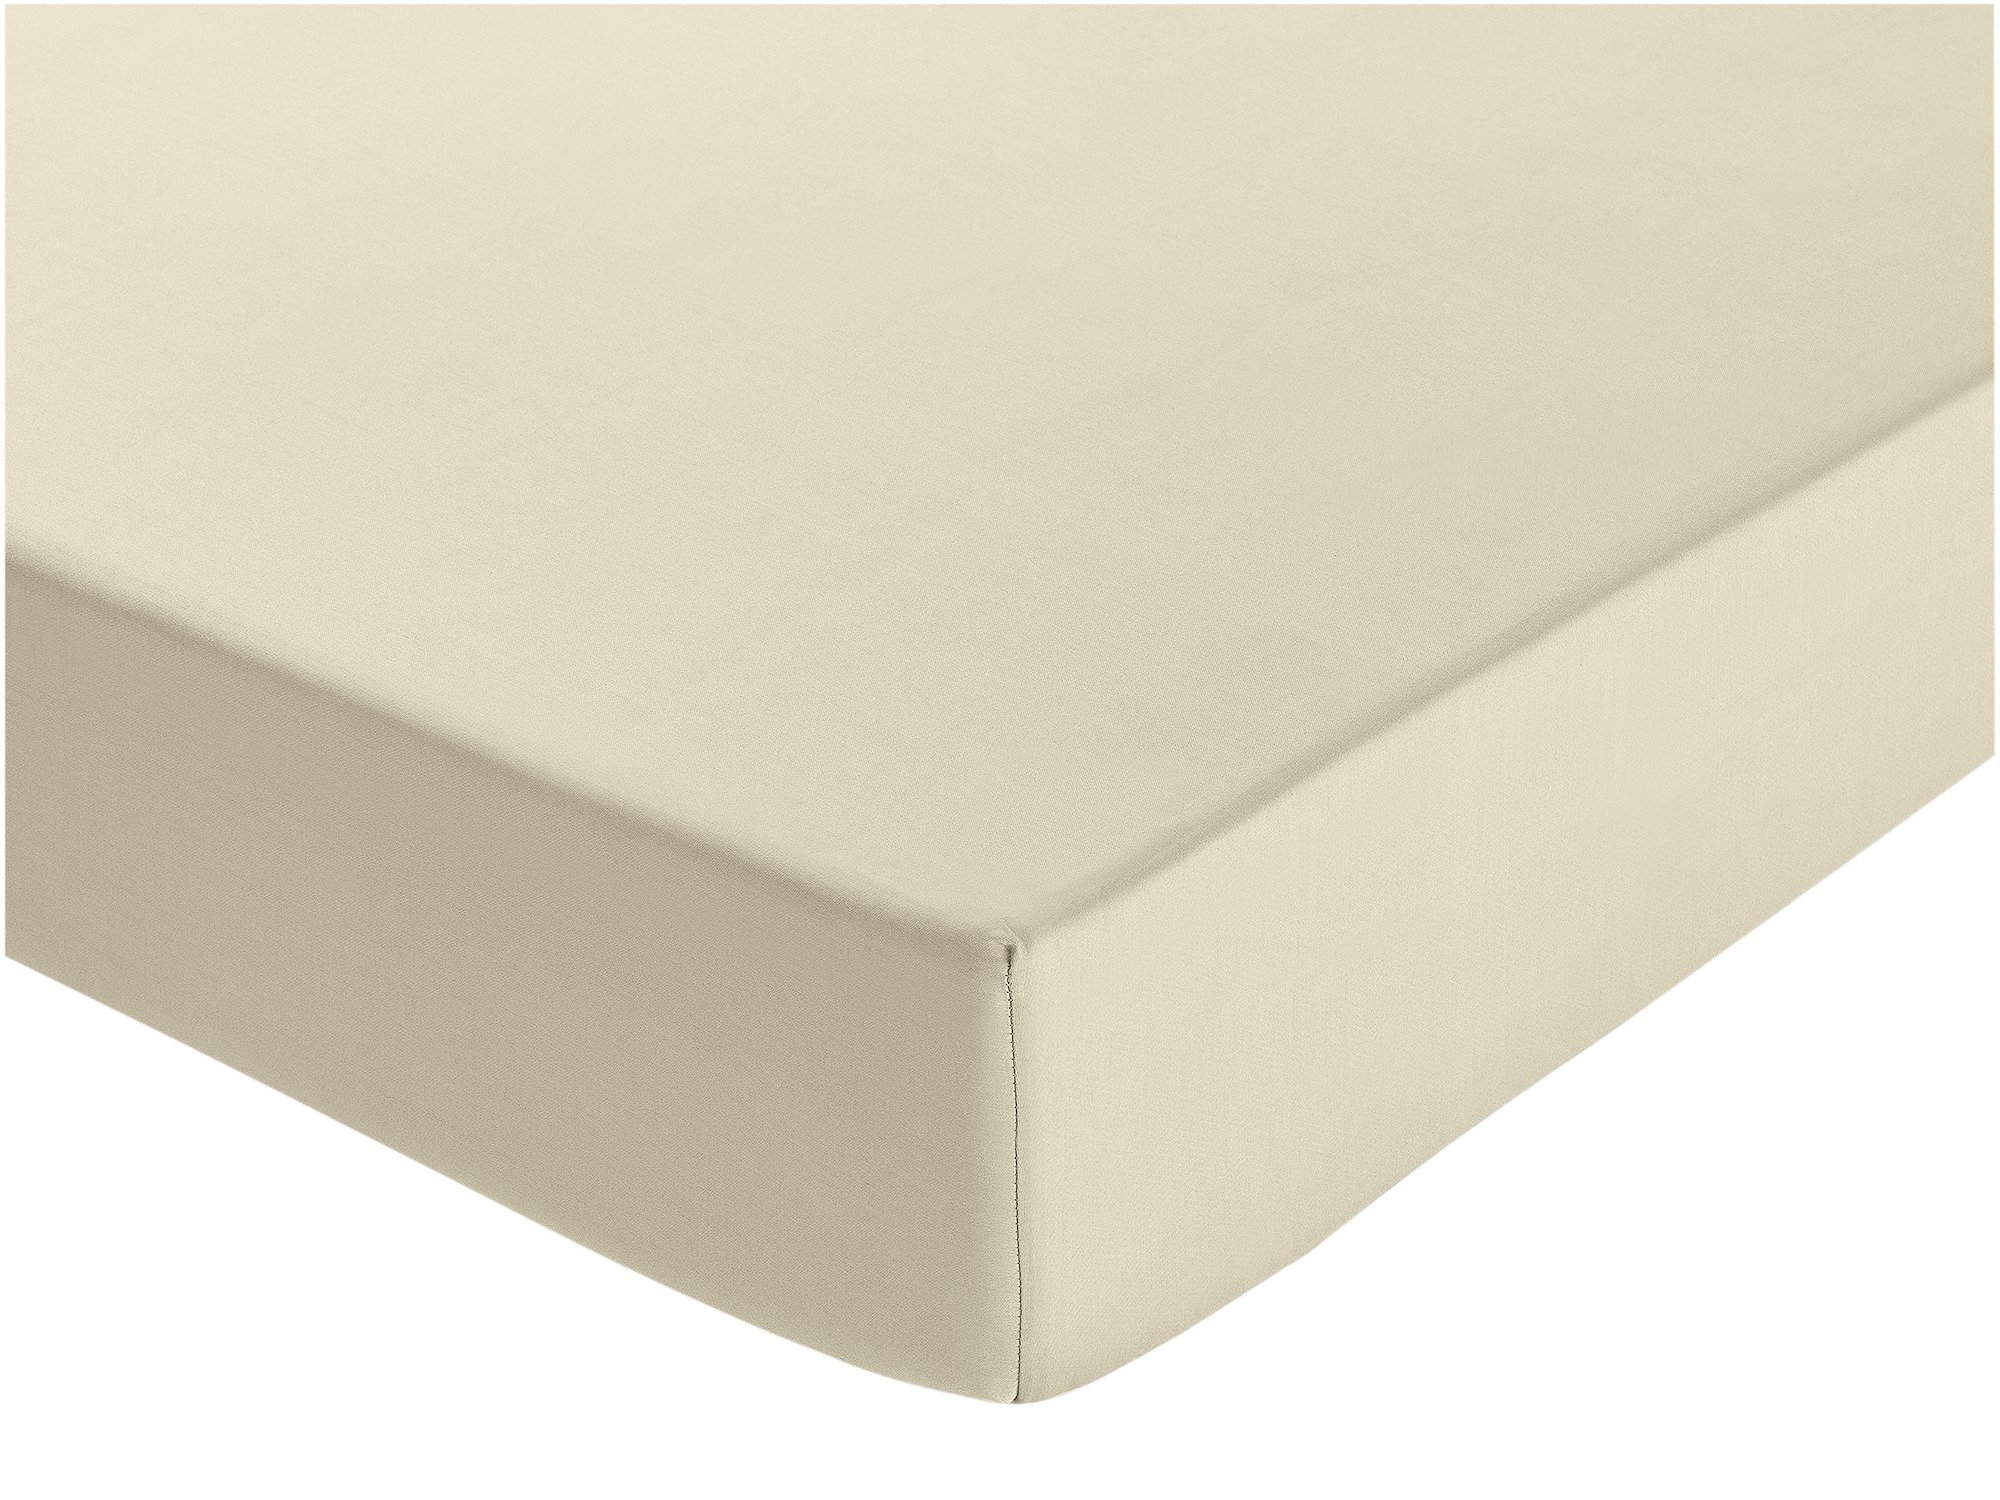 Argos Home Ivory Extra Deep Fitted Sheet - Superking